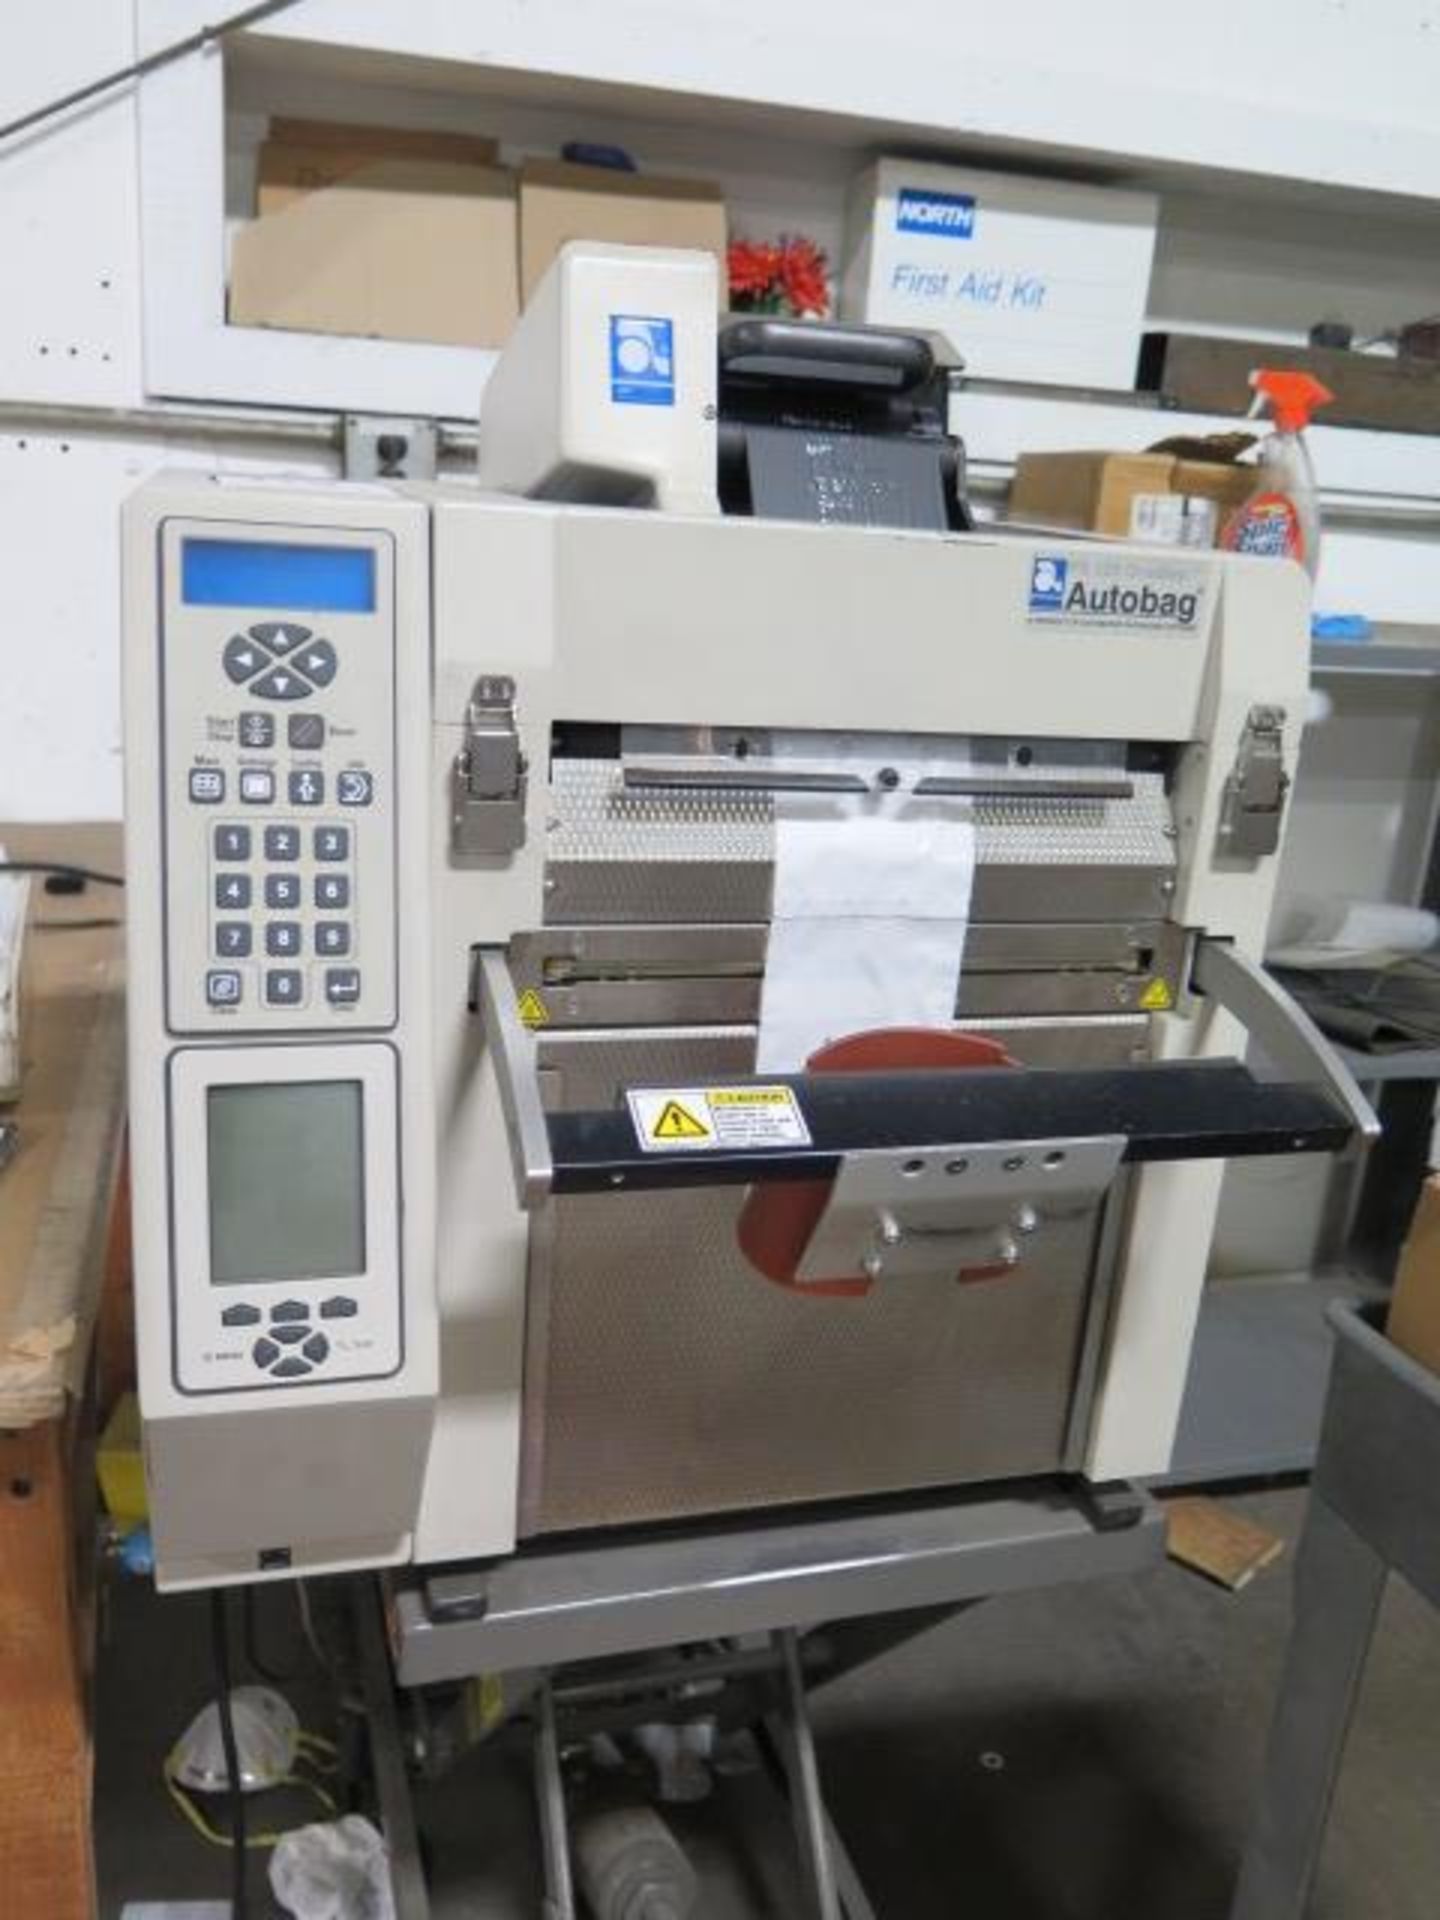 Automated Packaging "PaceSetter Autobag" PS 125 Onestep Bagging and Printinting Machine, SOLD AS IS